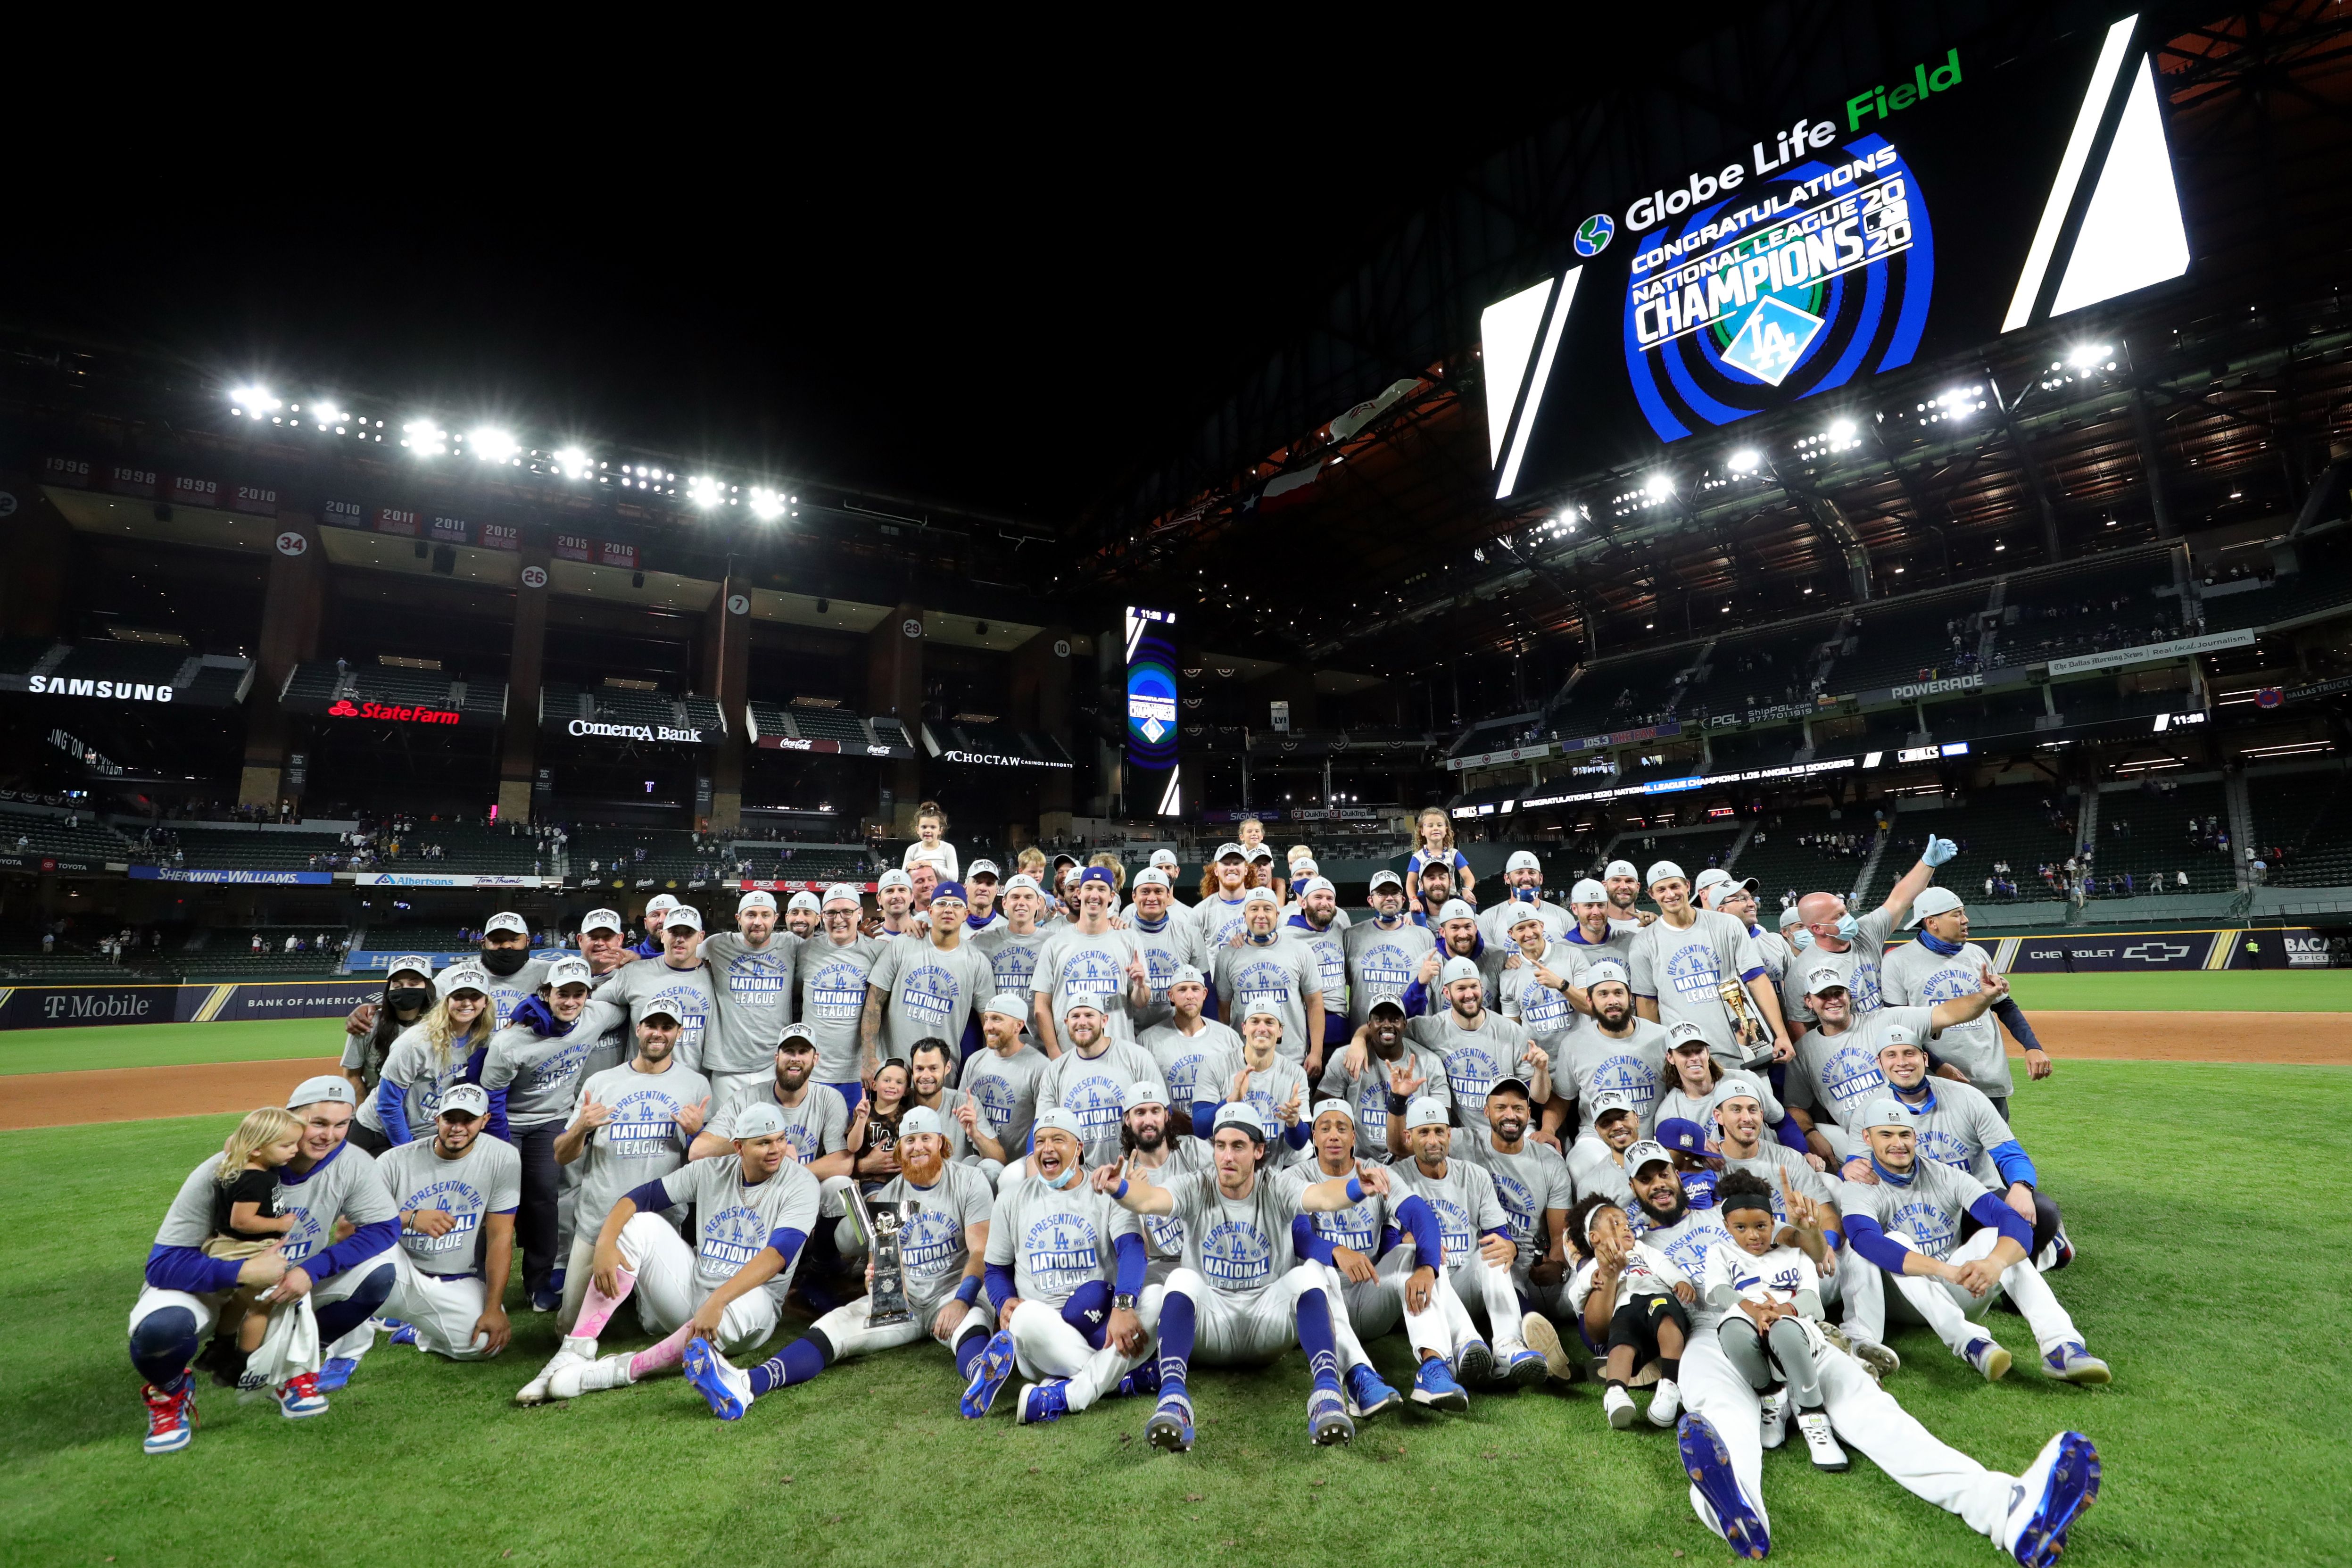 Members of the Los Angeles Dodgers pose for a team photo on the mound after defeating the Atlanta Brave in Game 7 of the NLCS at Globe Life Field on Sunday, October 18, 2020 | Photo: Getty Images